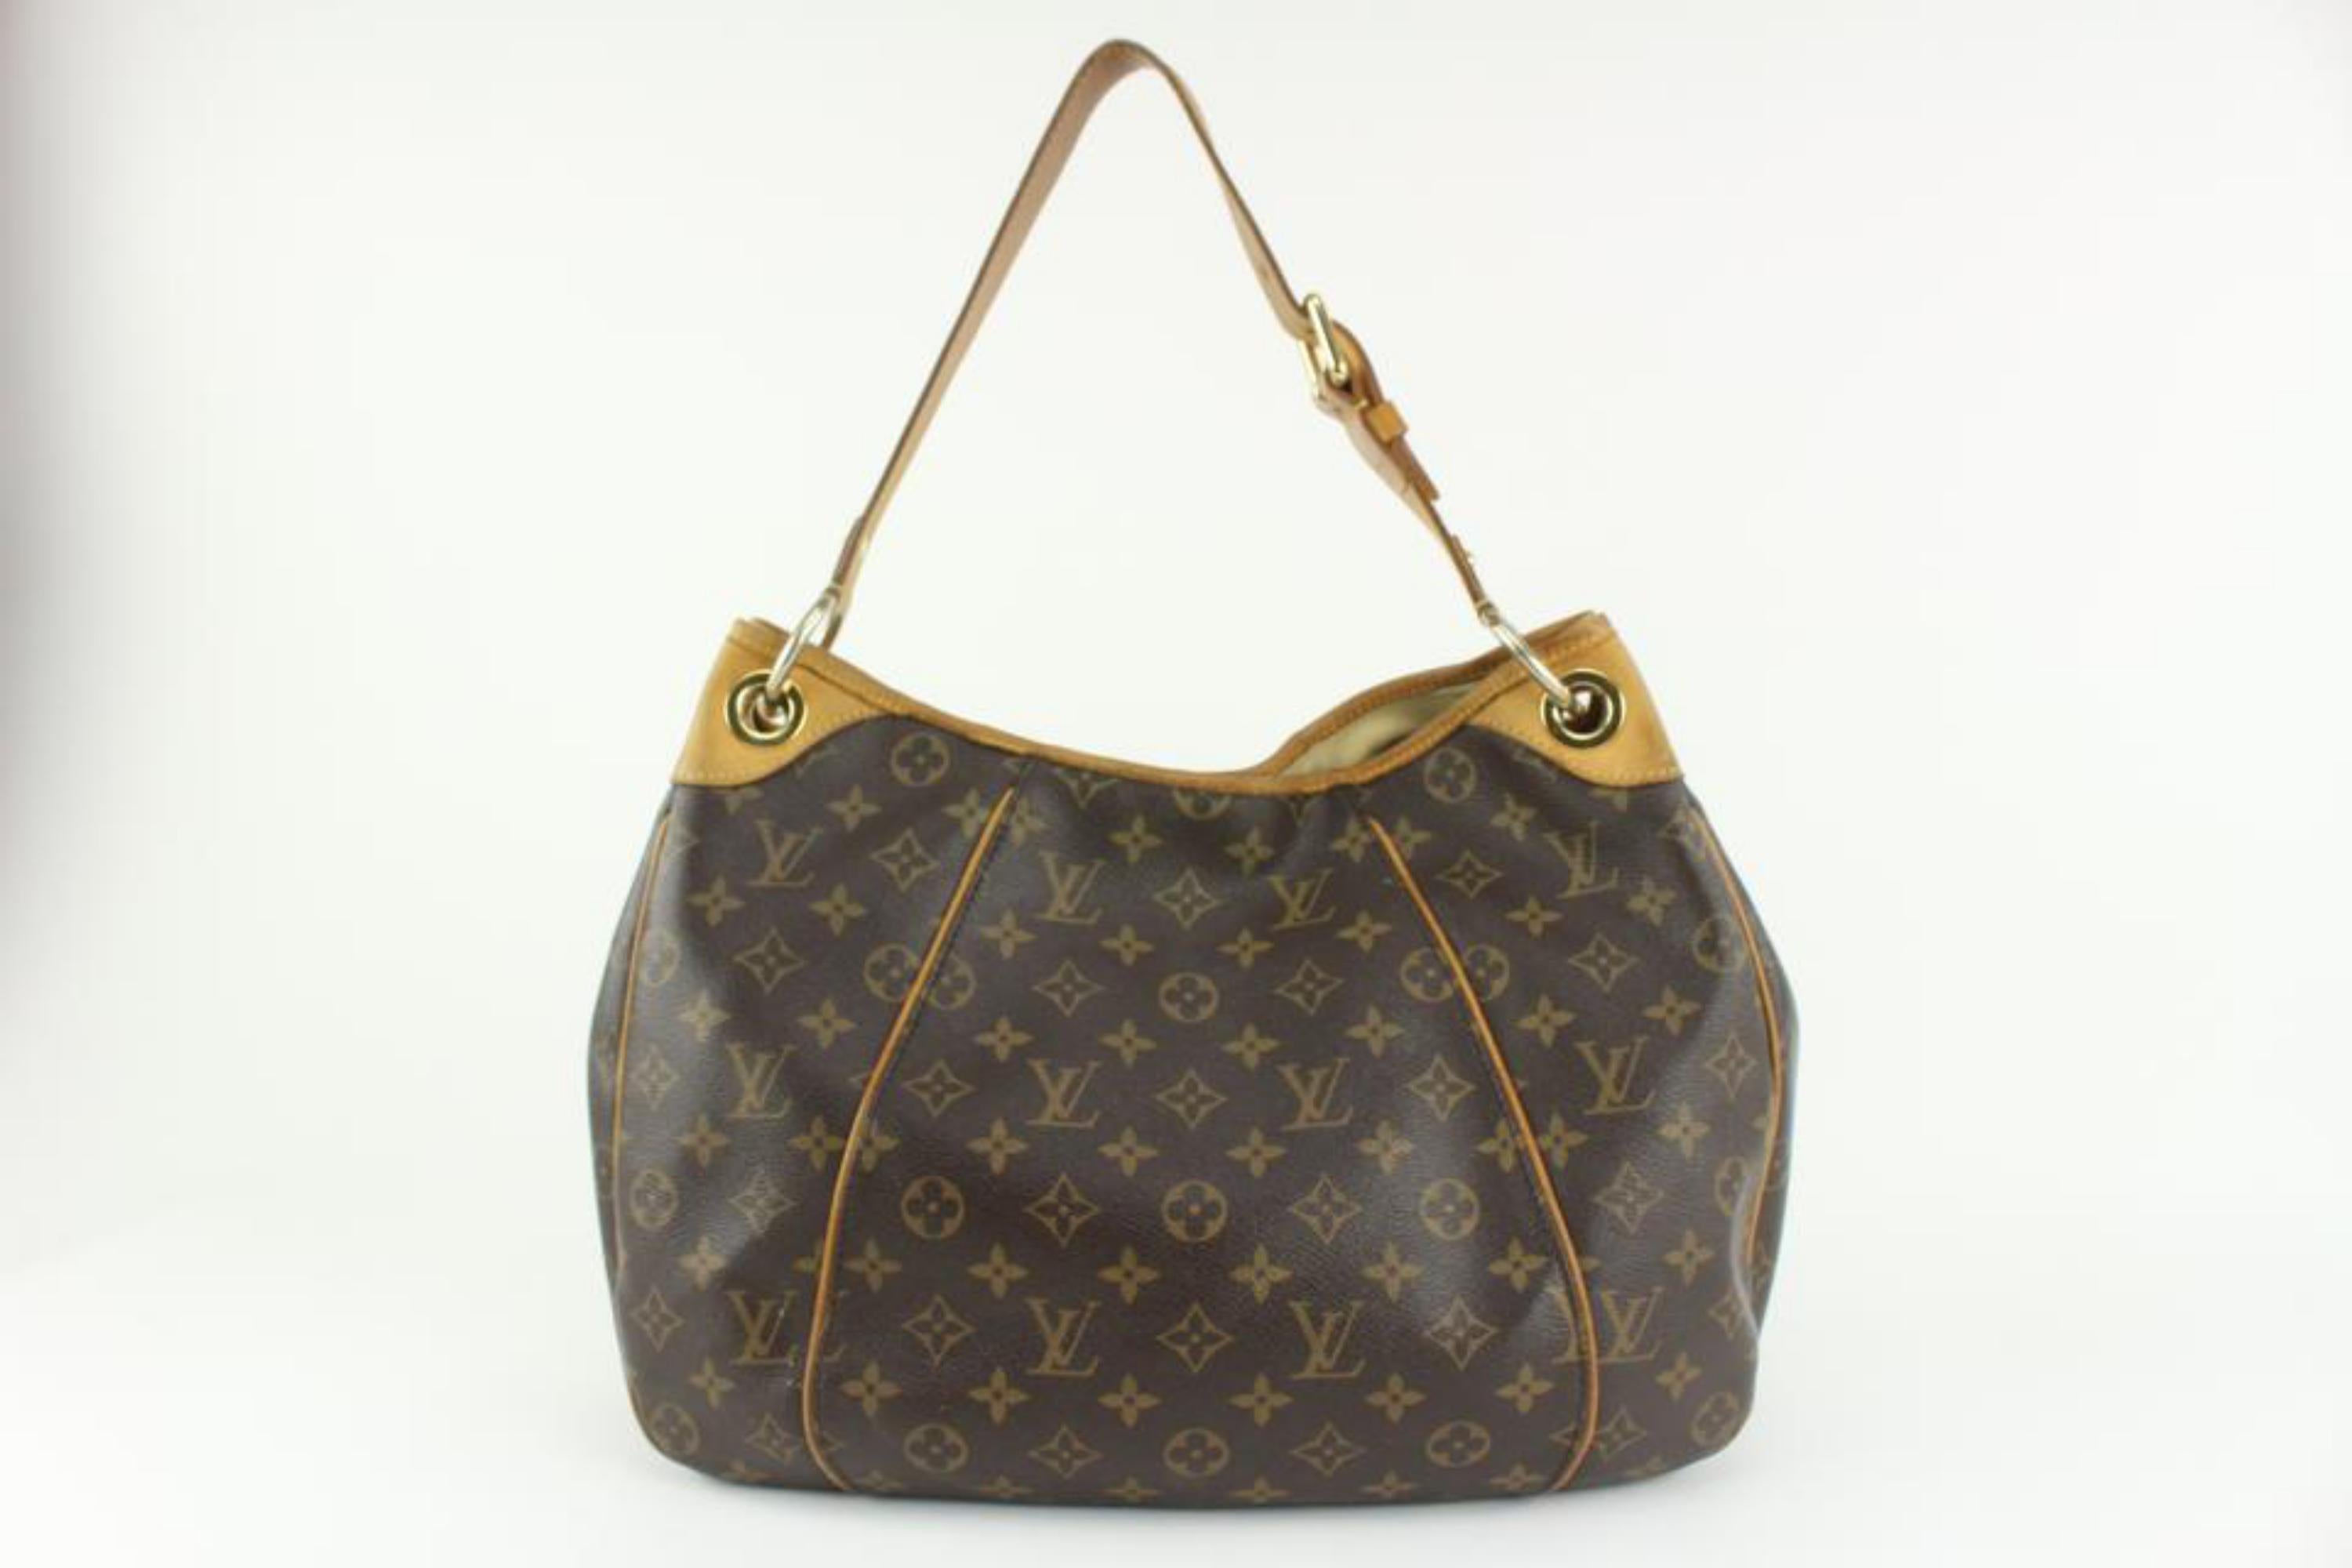 Louis Vuitton Monogram Galliera PM Hobo Bag 121lv43 In Good Condition For Sale In Dix hills, NY